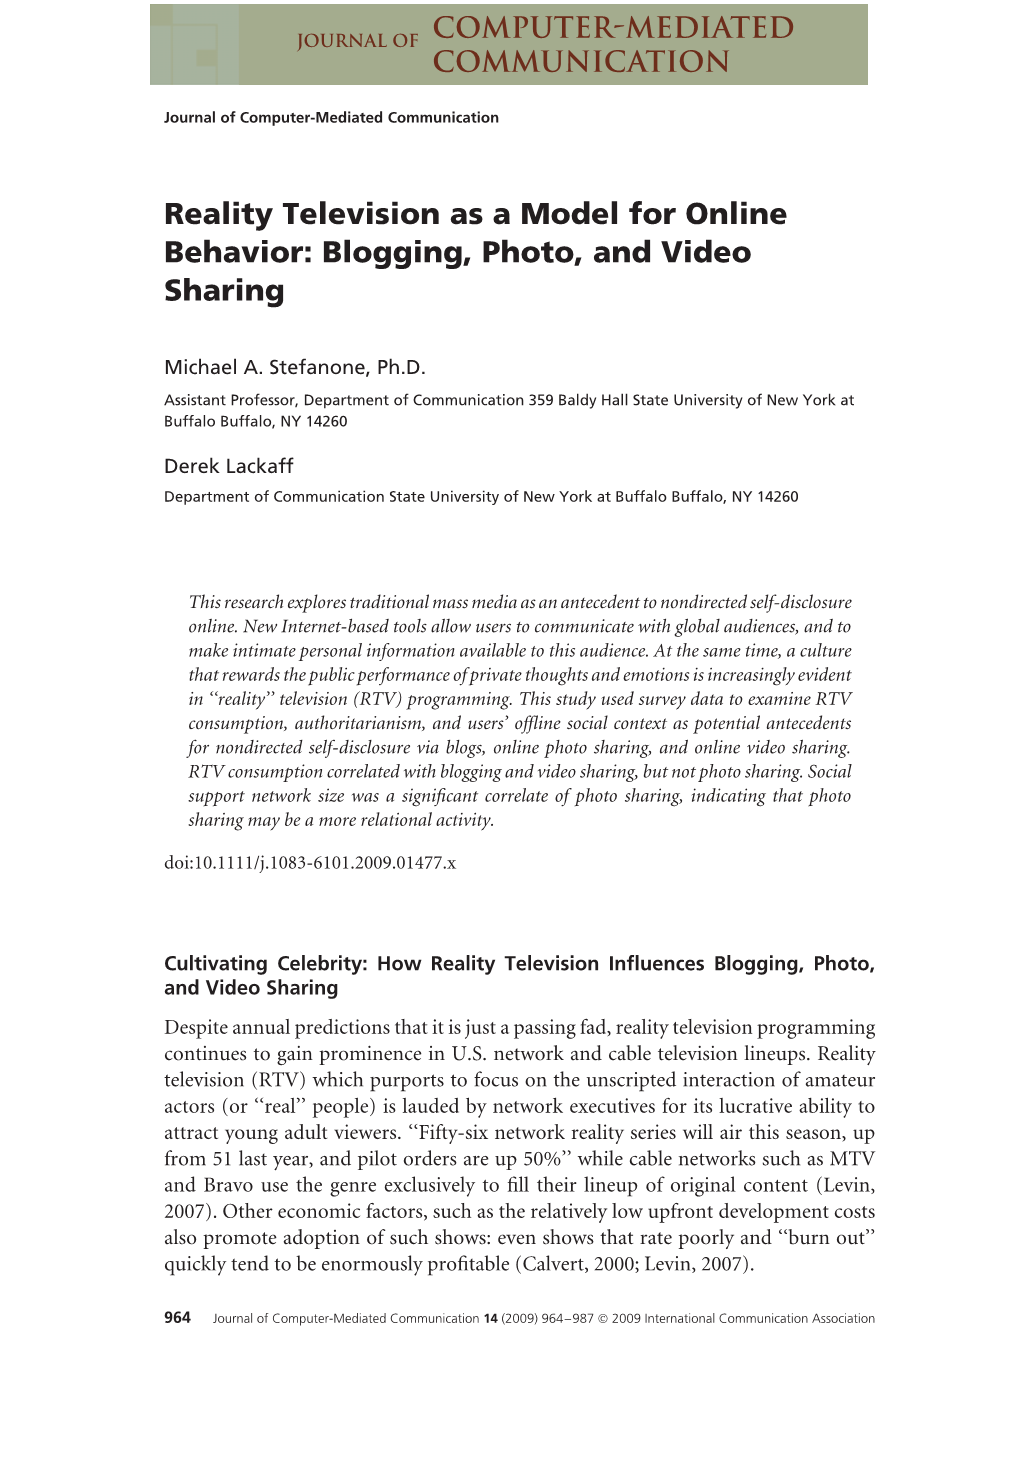 Reality Television As a Model for Online Behavior: Blogging, Photo, and Video Sharing